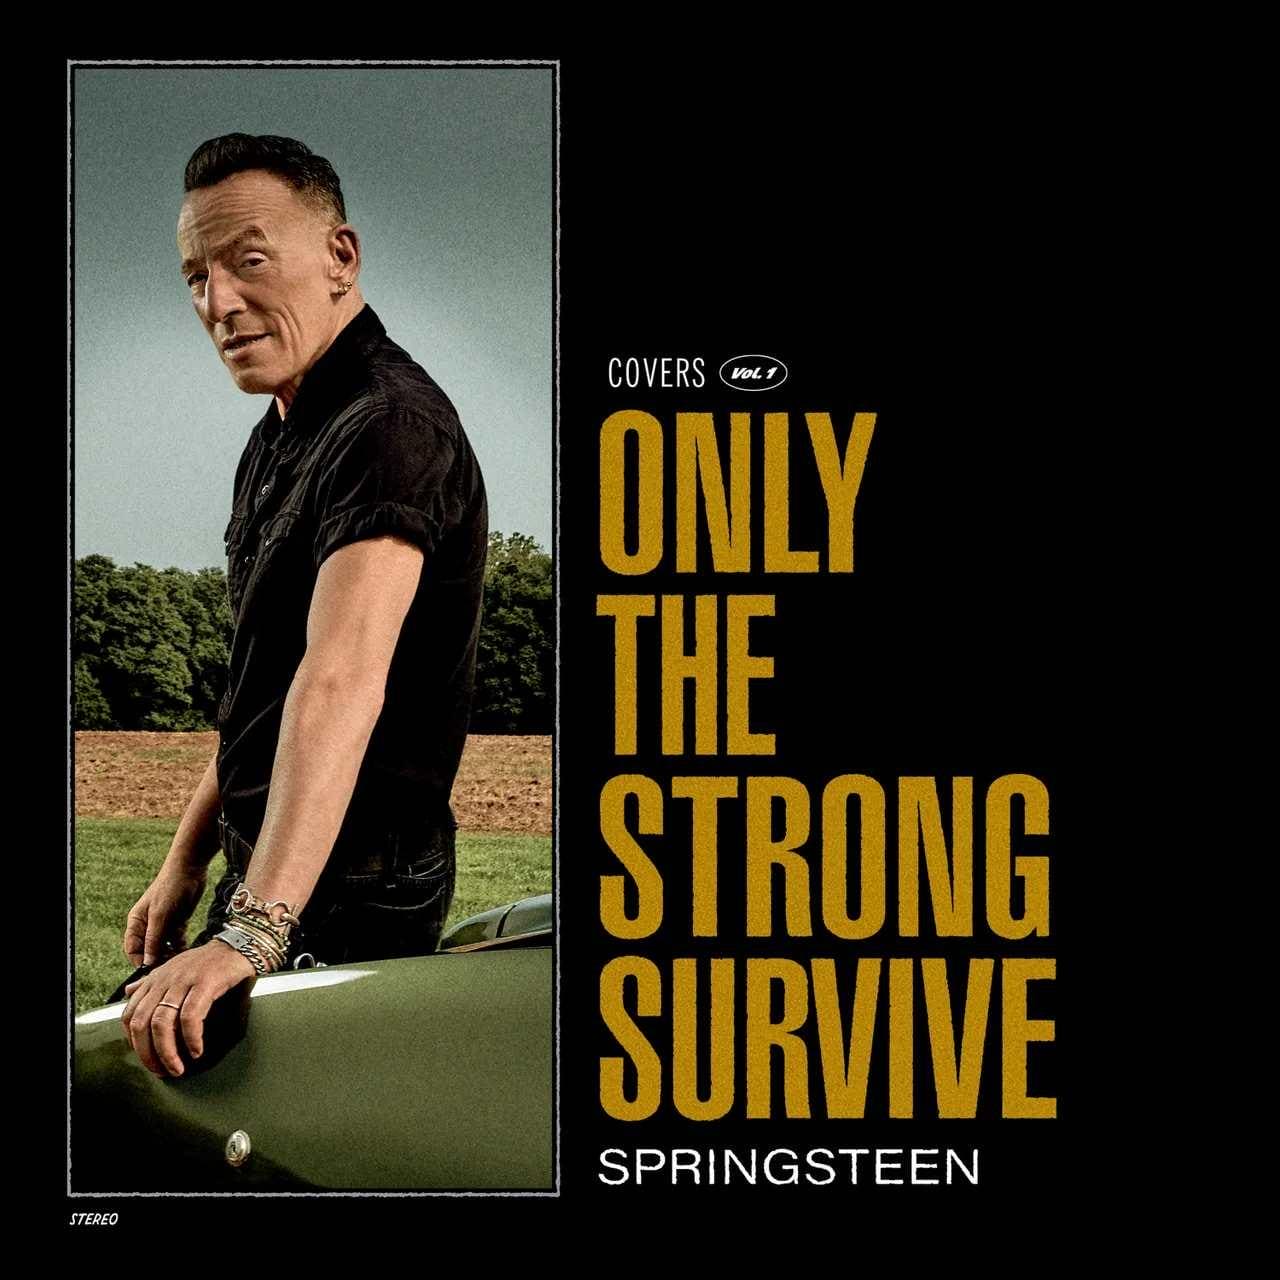 BRUCE SPRINGSTEEN - Only The Strong Survive Vinyl - JWrayRecords